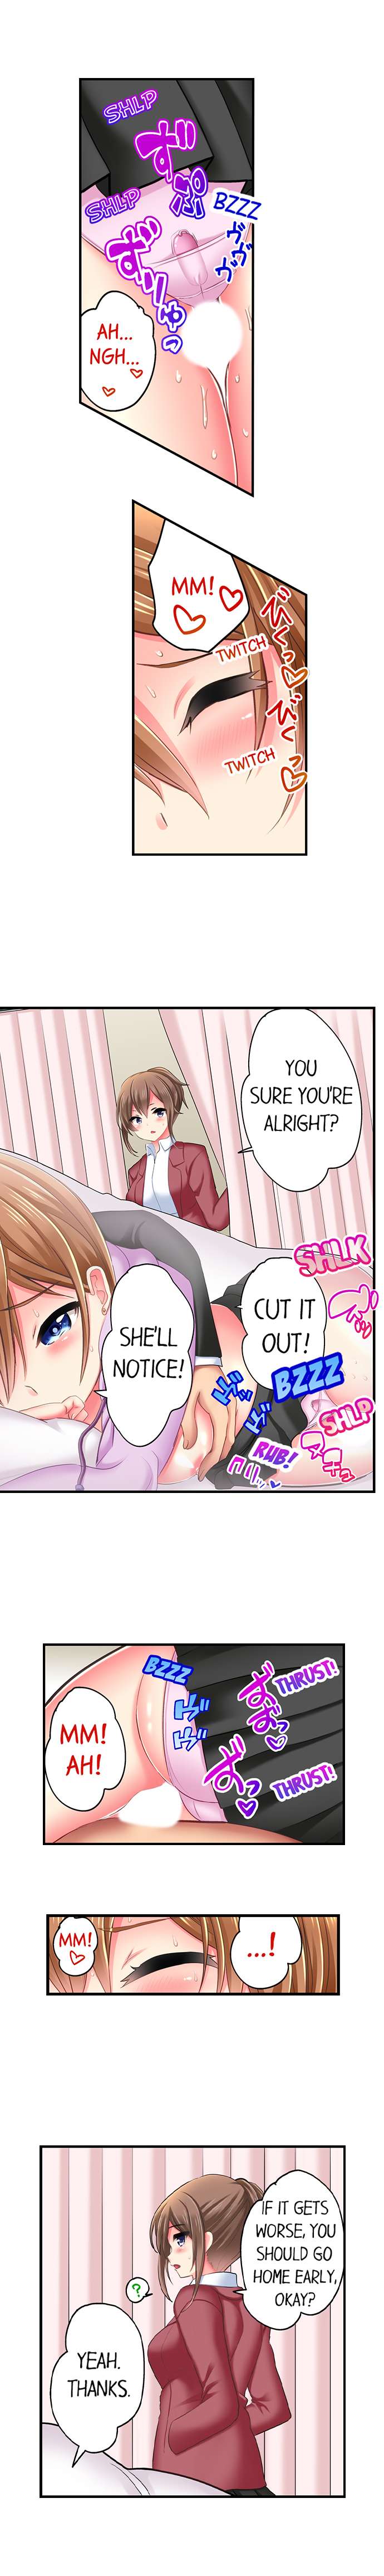 Sex in the Adult Toys Section - Chapter 6 Page 6